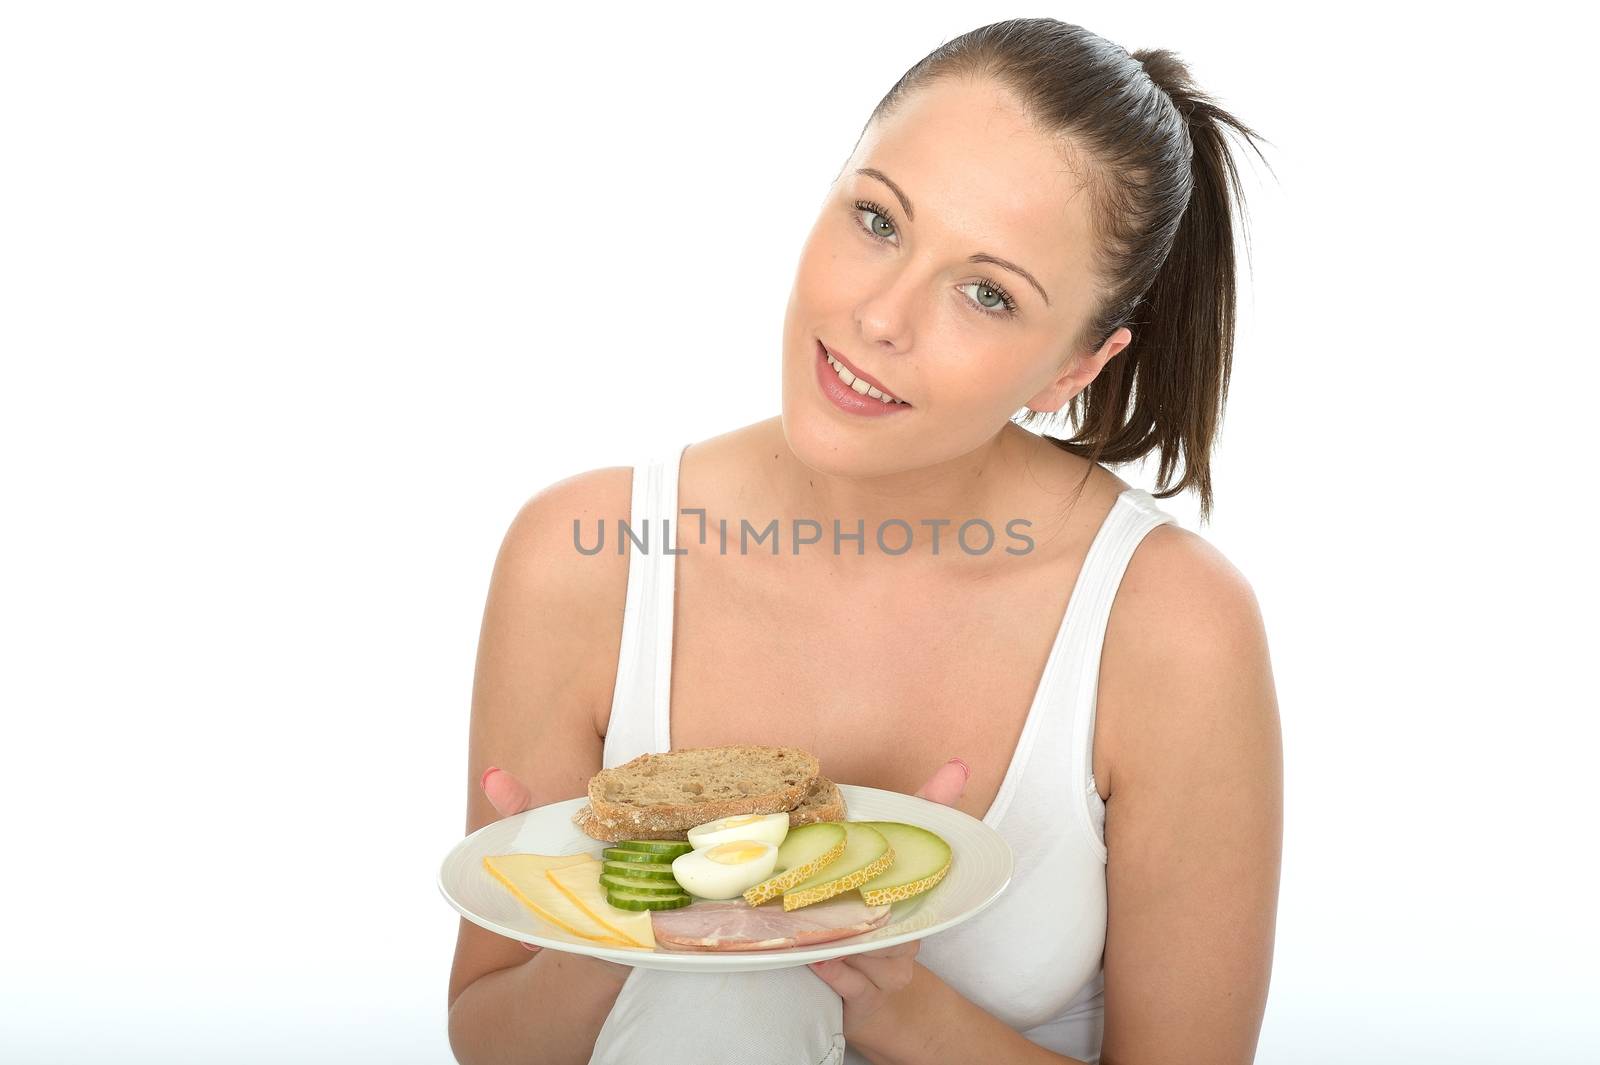 Healthy Young Woman Holding a Plate of a Typical Low Fat Norwegian or Scandinavian Style Breakfast